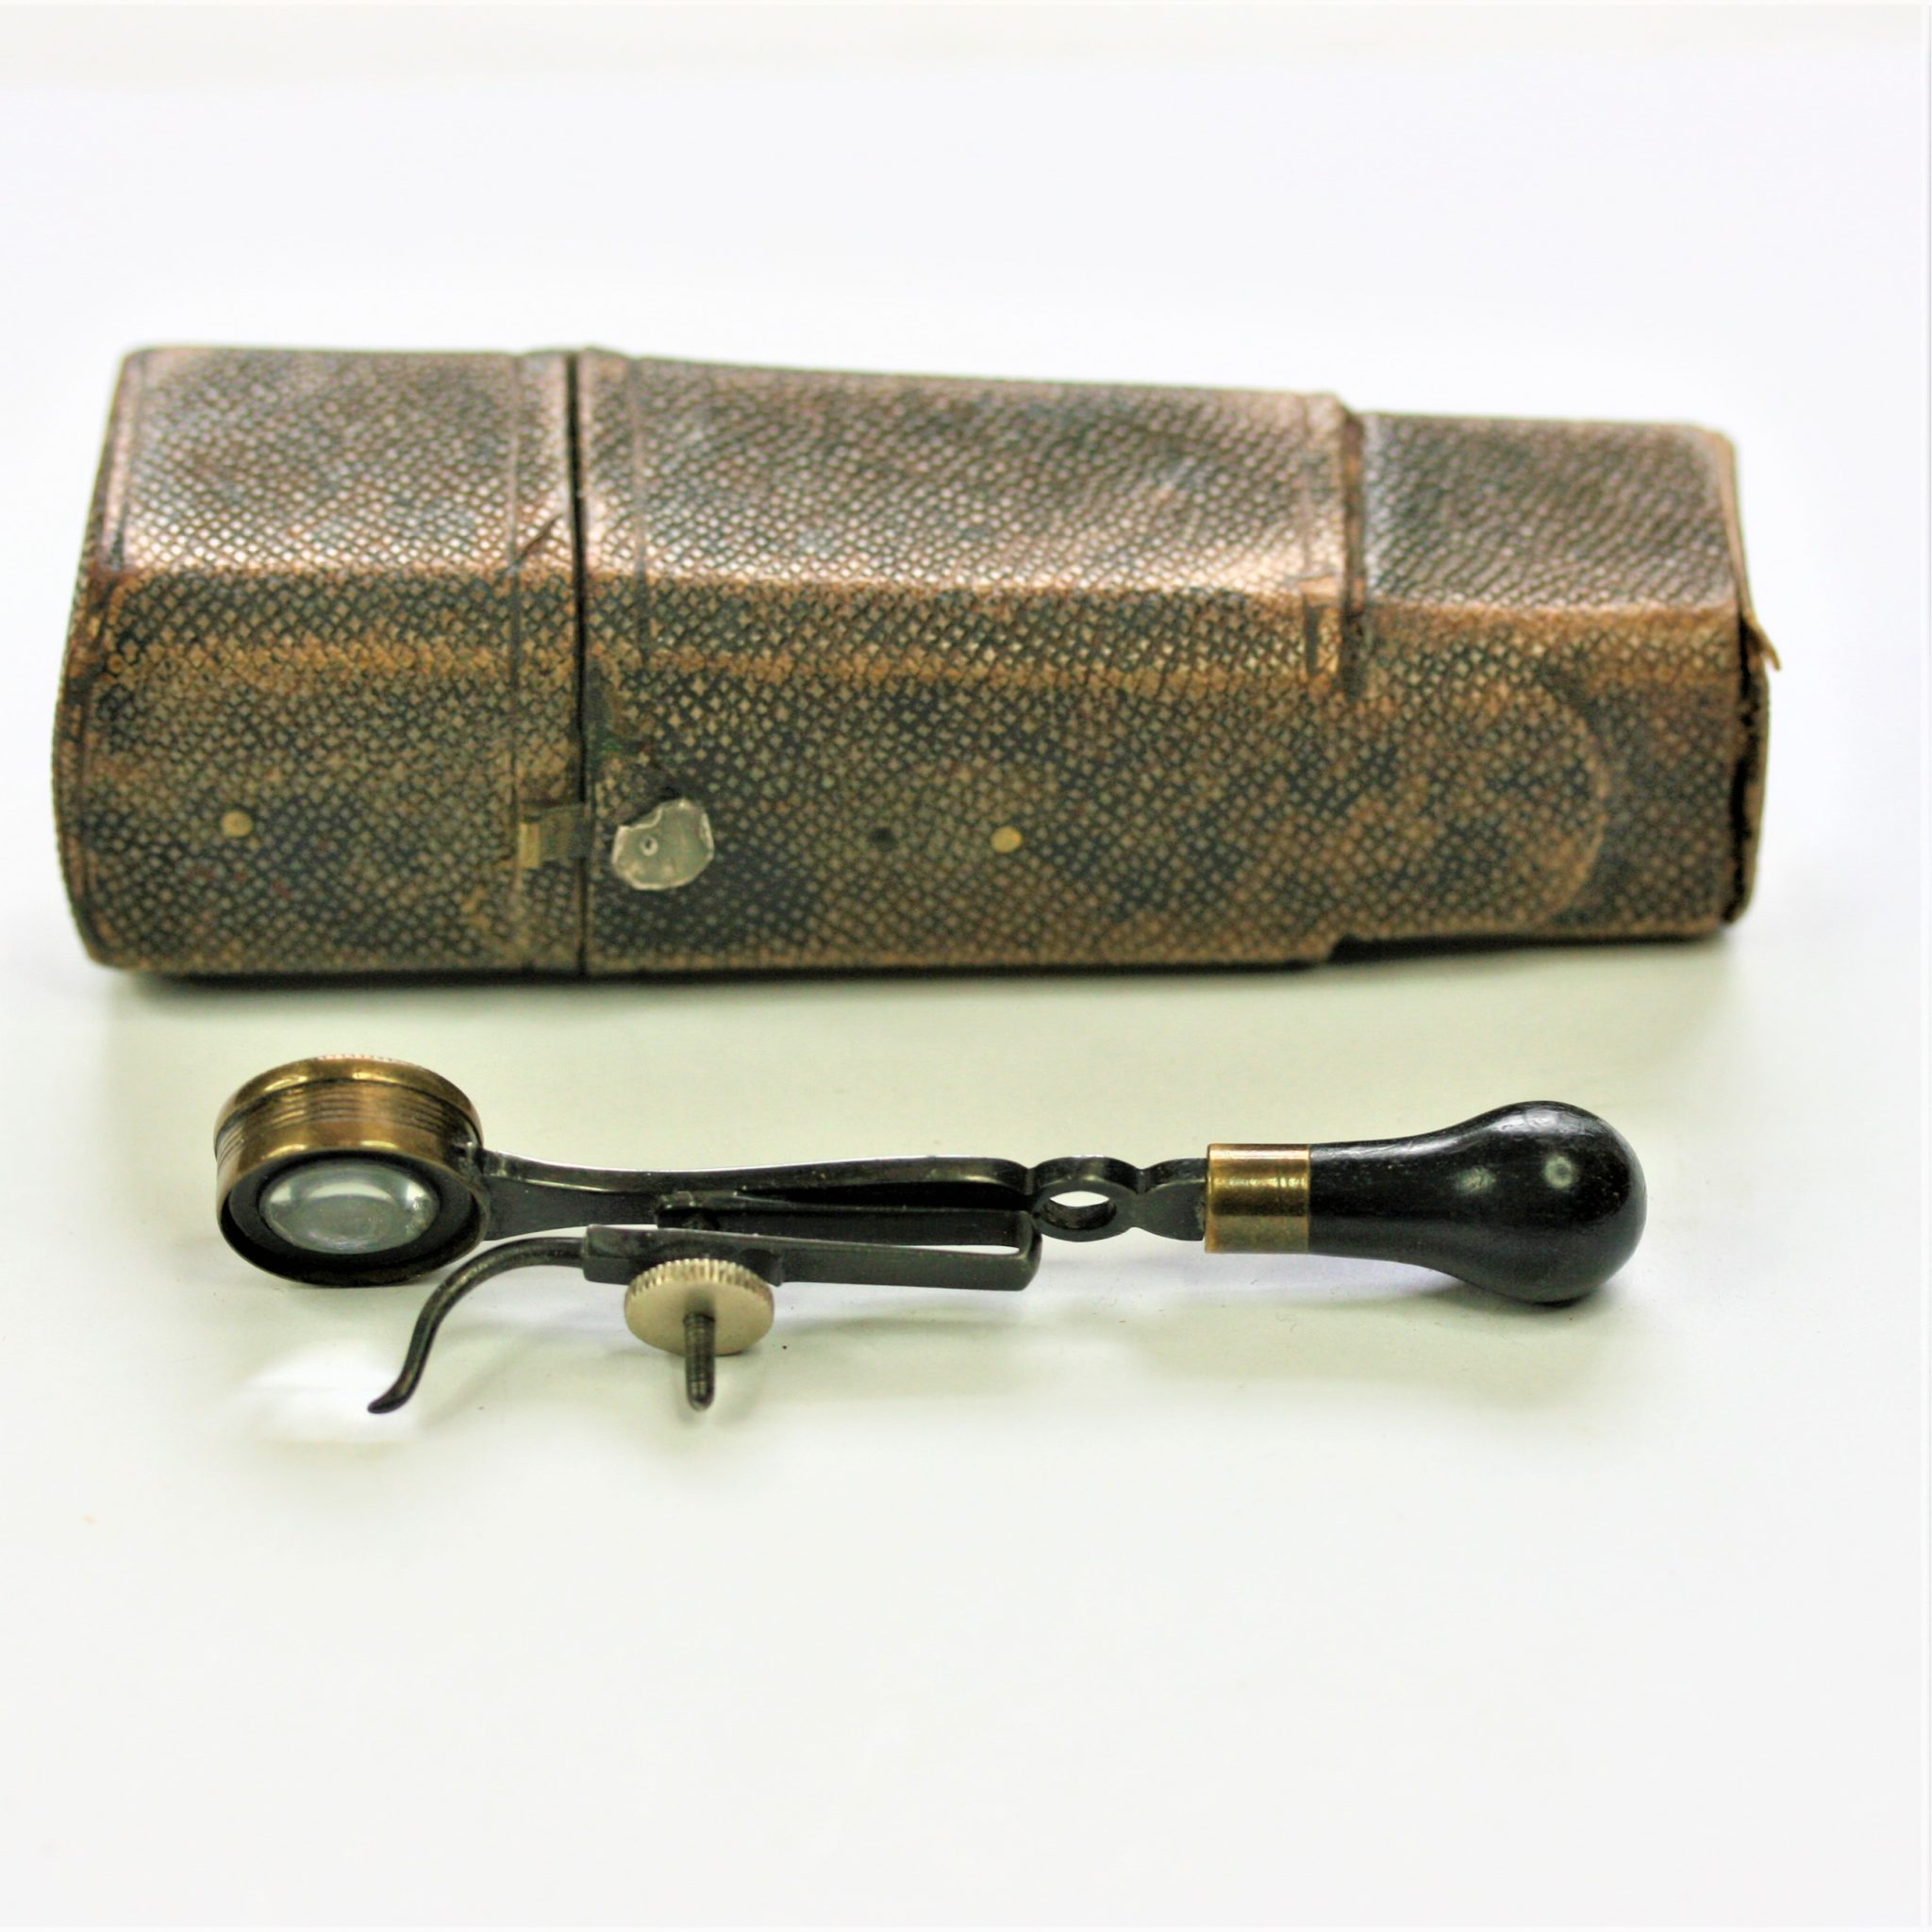 POCKET HAND HELD  MICROSCOPE MAGNIFYING GLASS  WITH SHAGREEN CASE , IMAGE GOOD , C1840